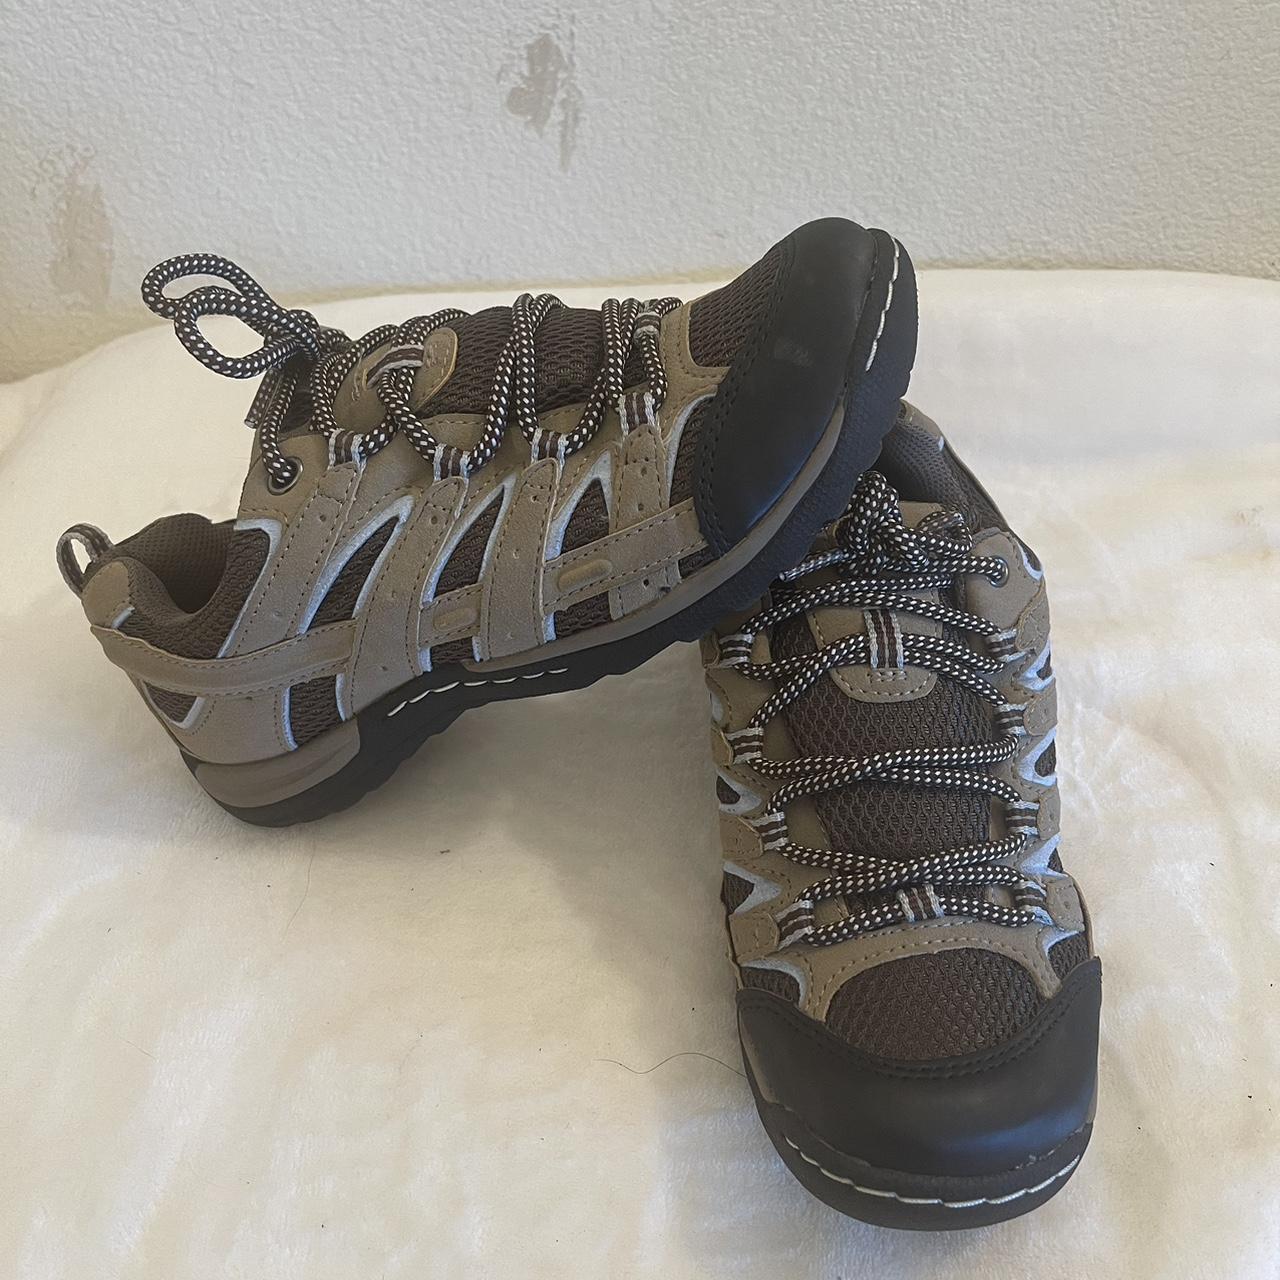 CLIFFS SHOES BY WHITE MOUNTAIN -lace up walking... - Depop